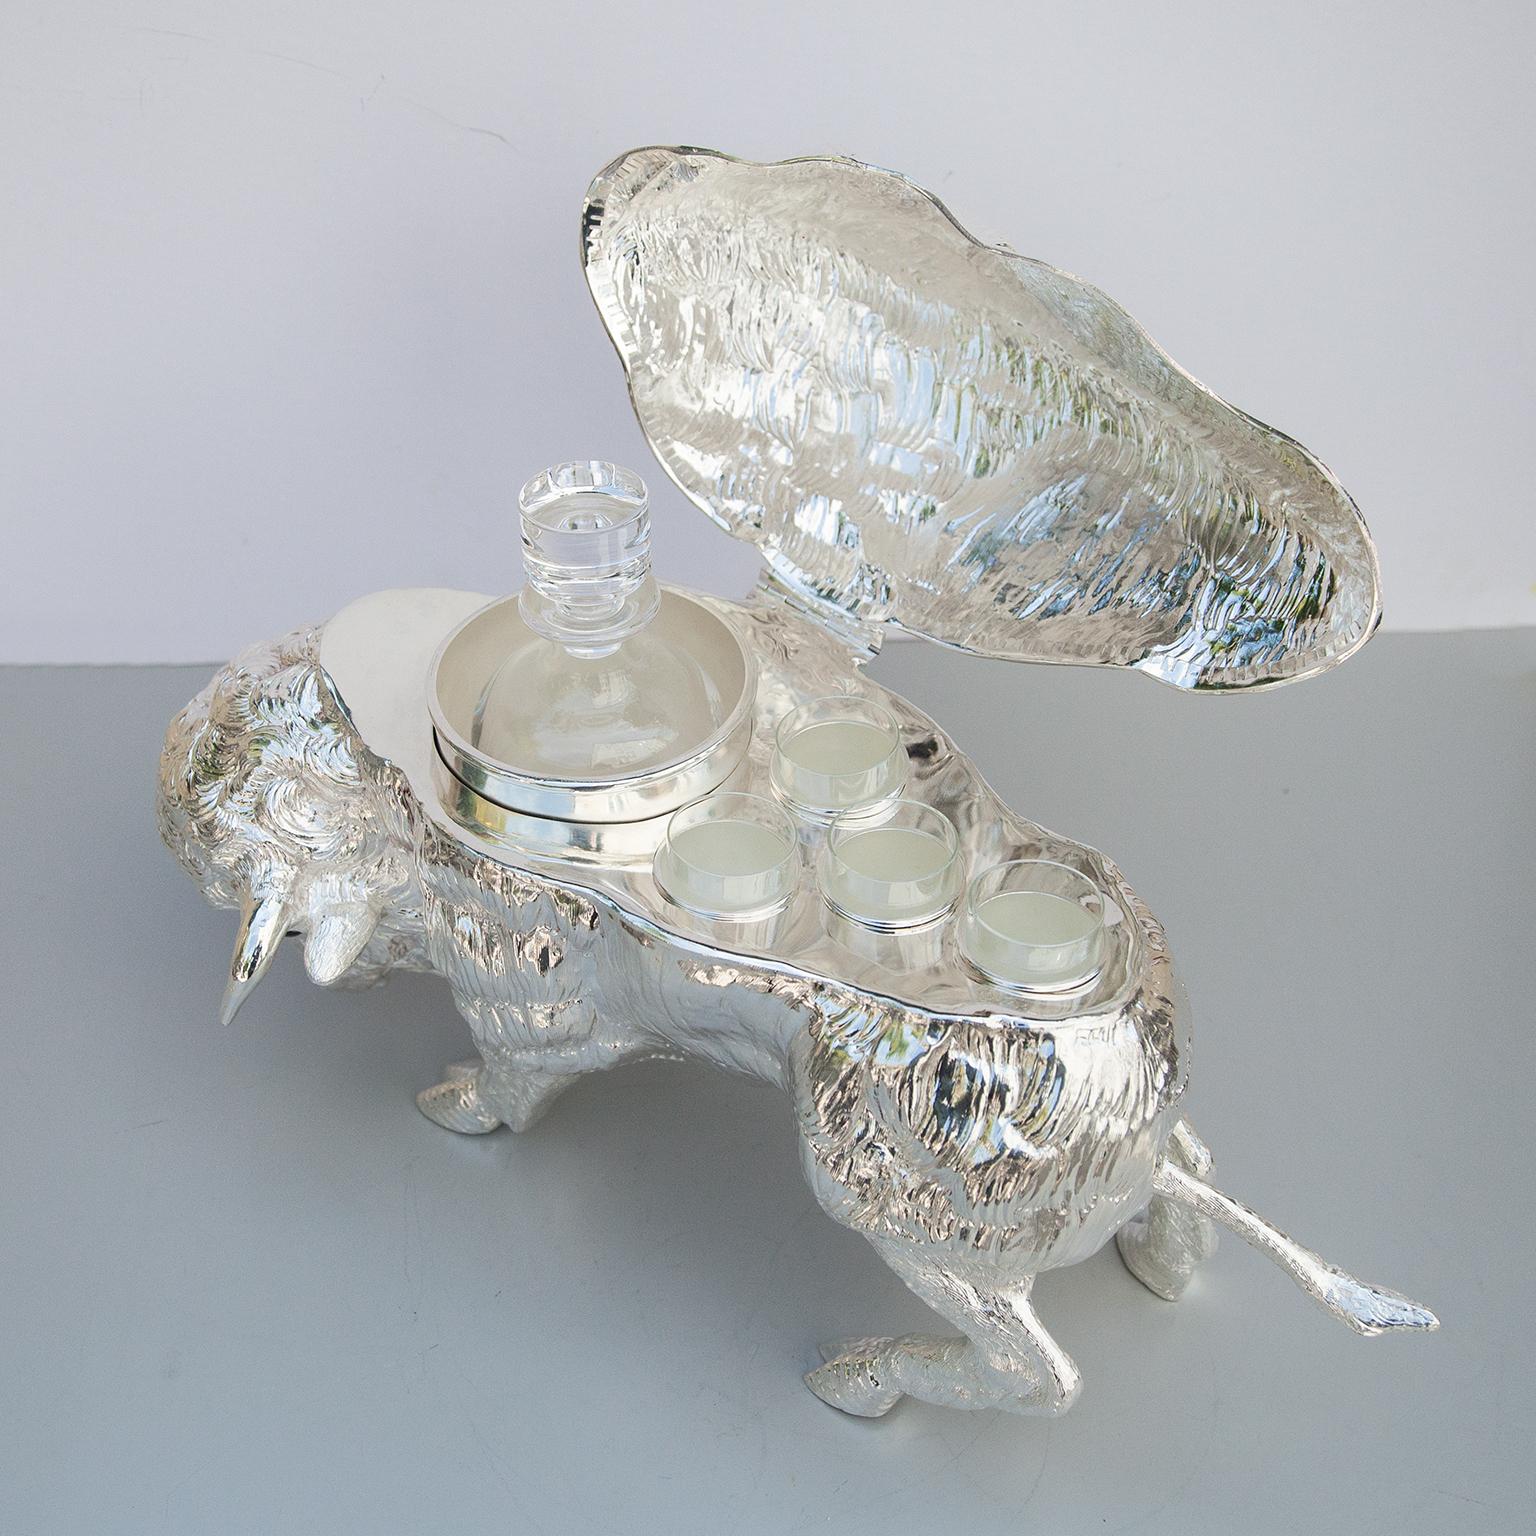 Silvered Franco Lapini Wild Bull Bison Silver Plated Liquor Bar Set, Italy, 1970 For Sale